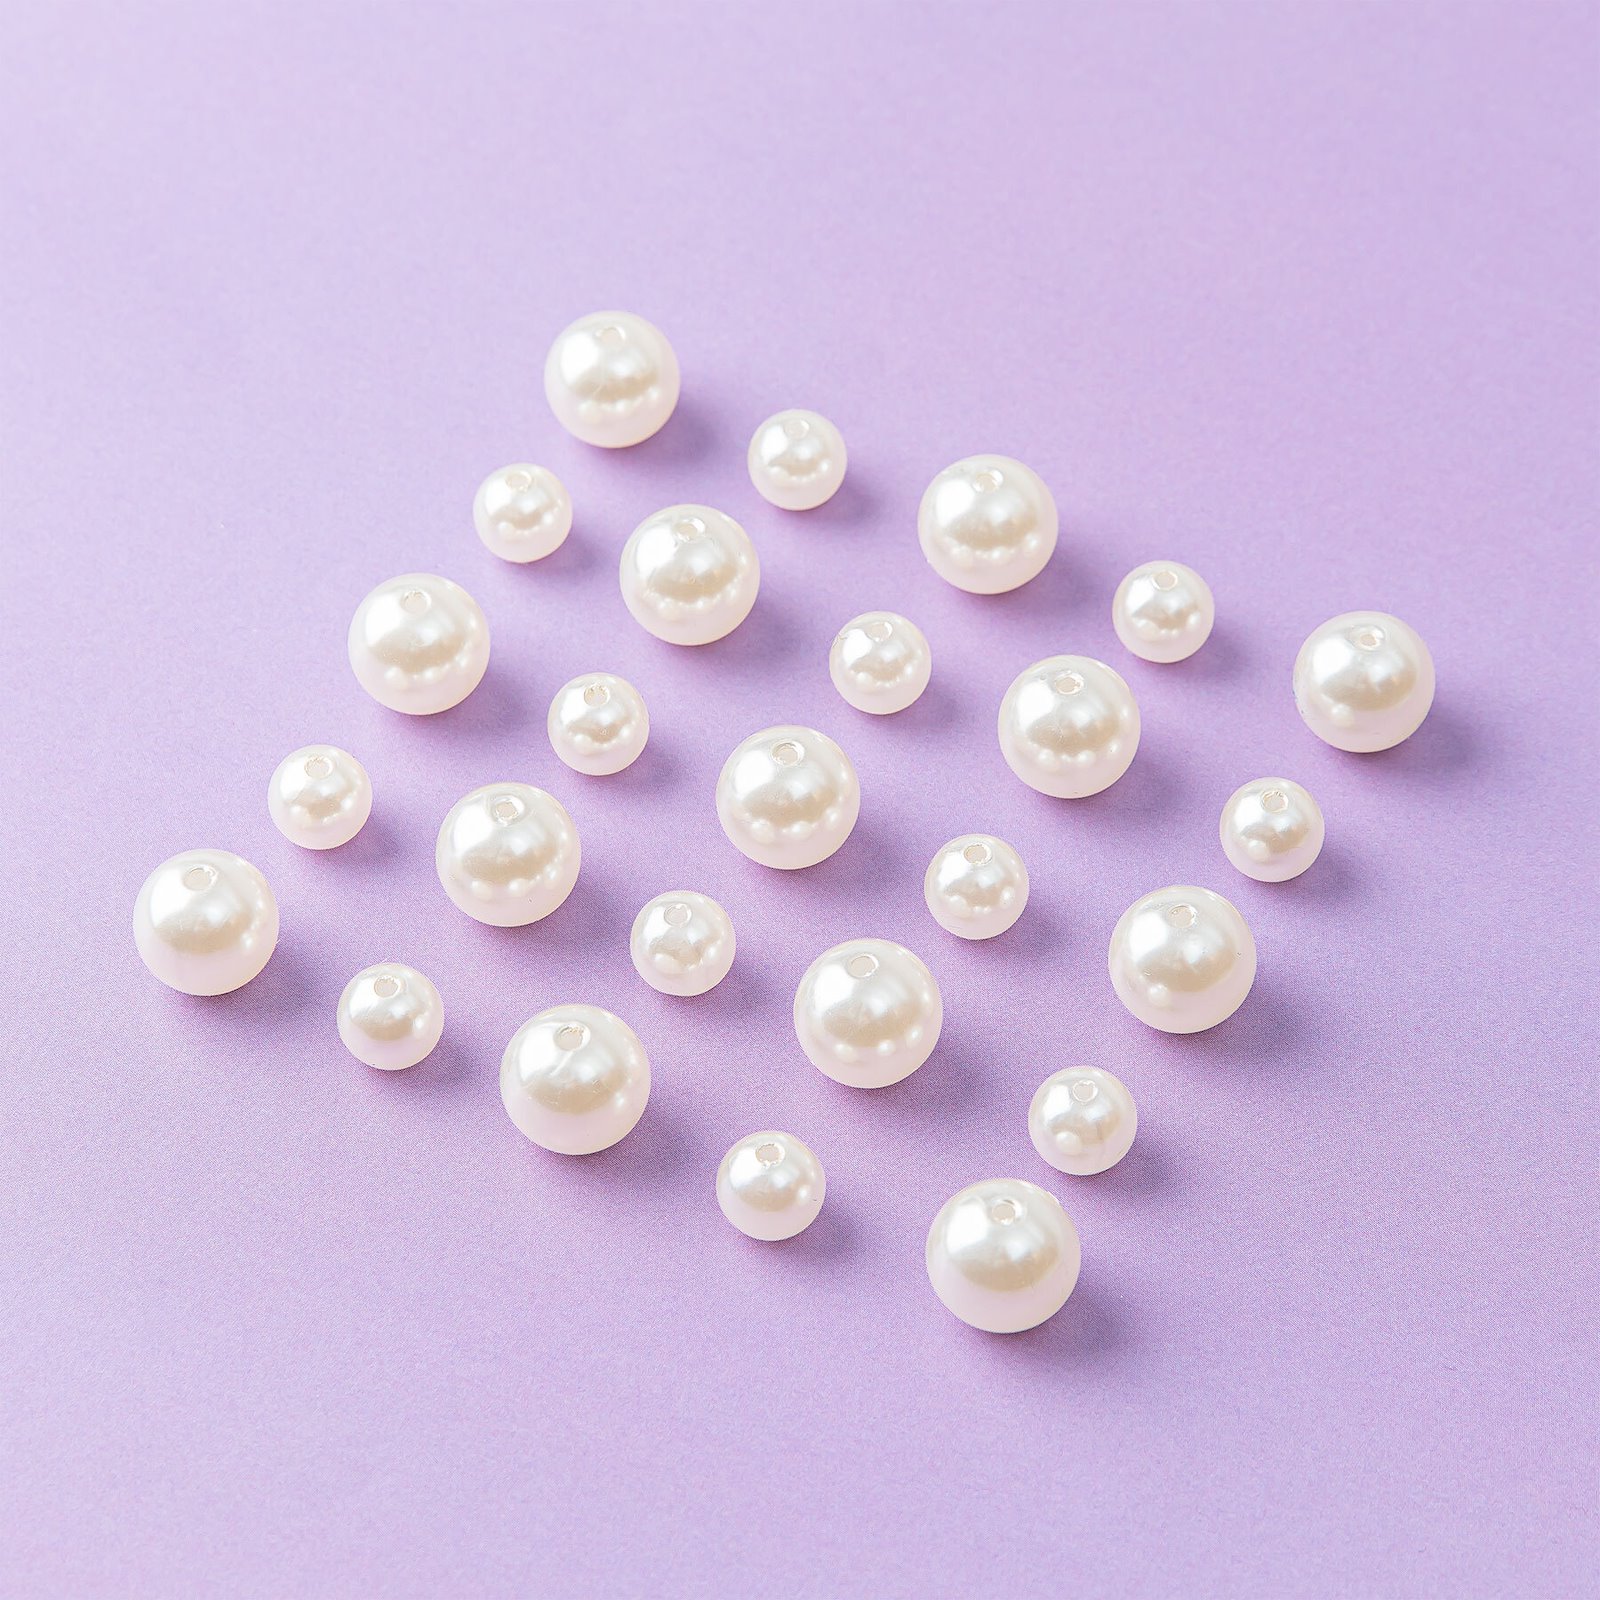 Beads 10mm MOP col. offwhite 25pcs 43261_43251_sskit